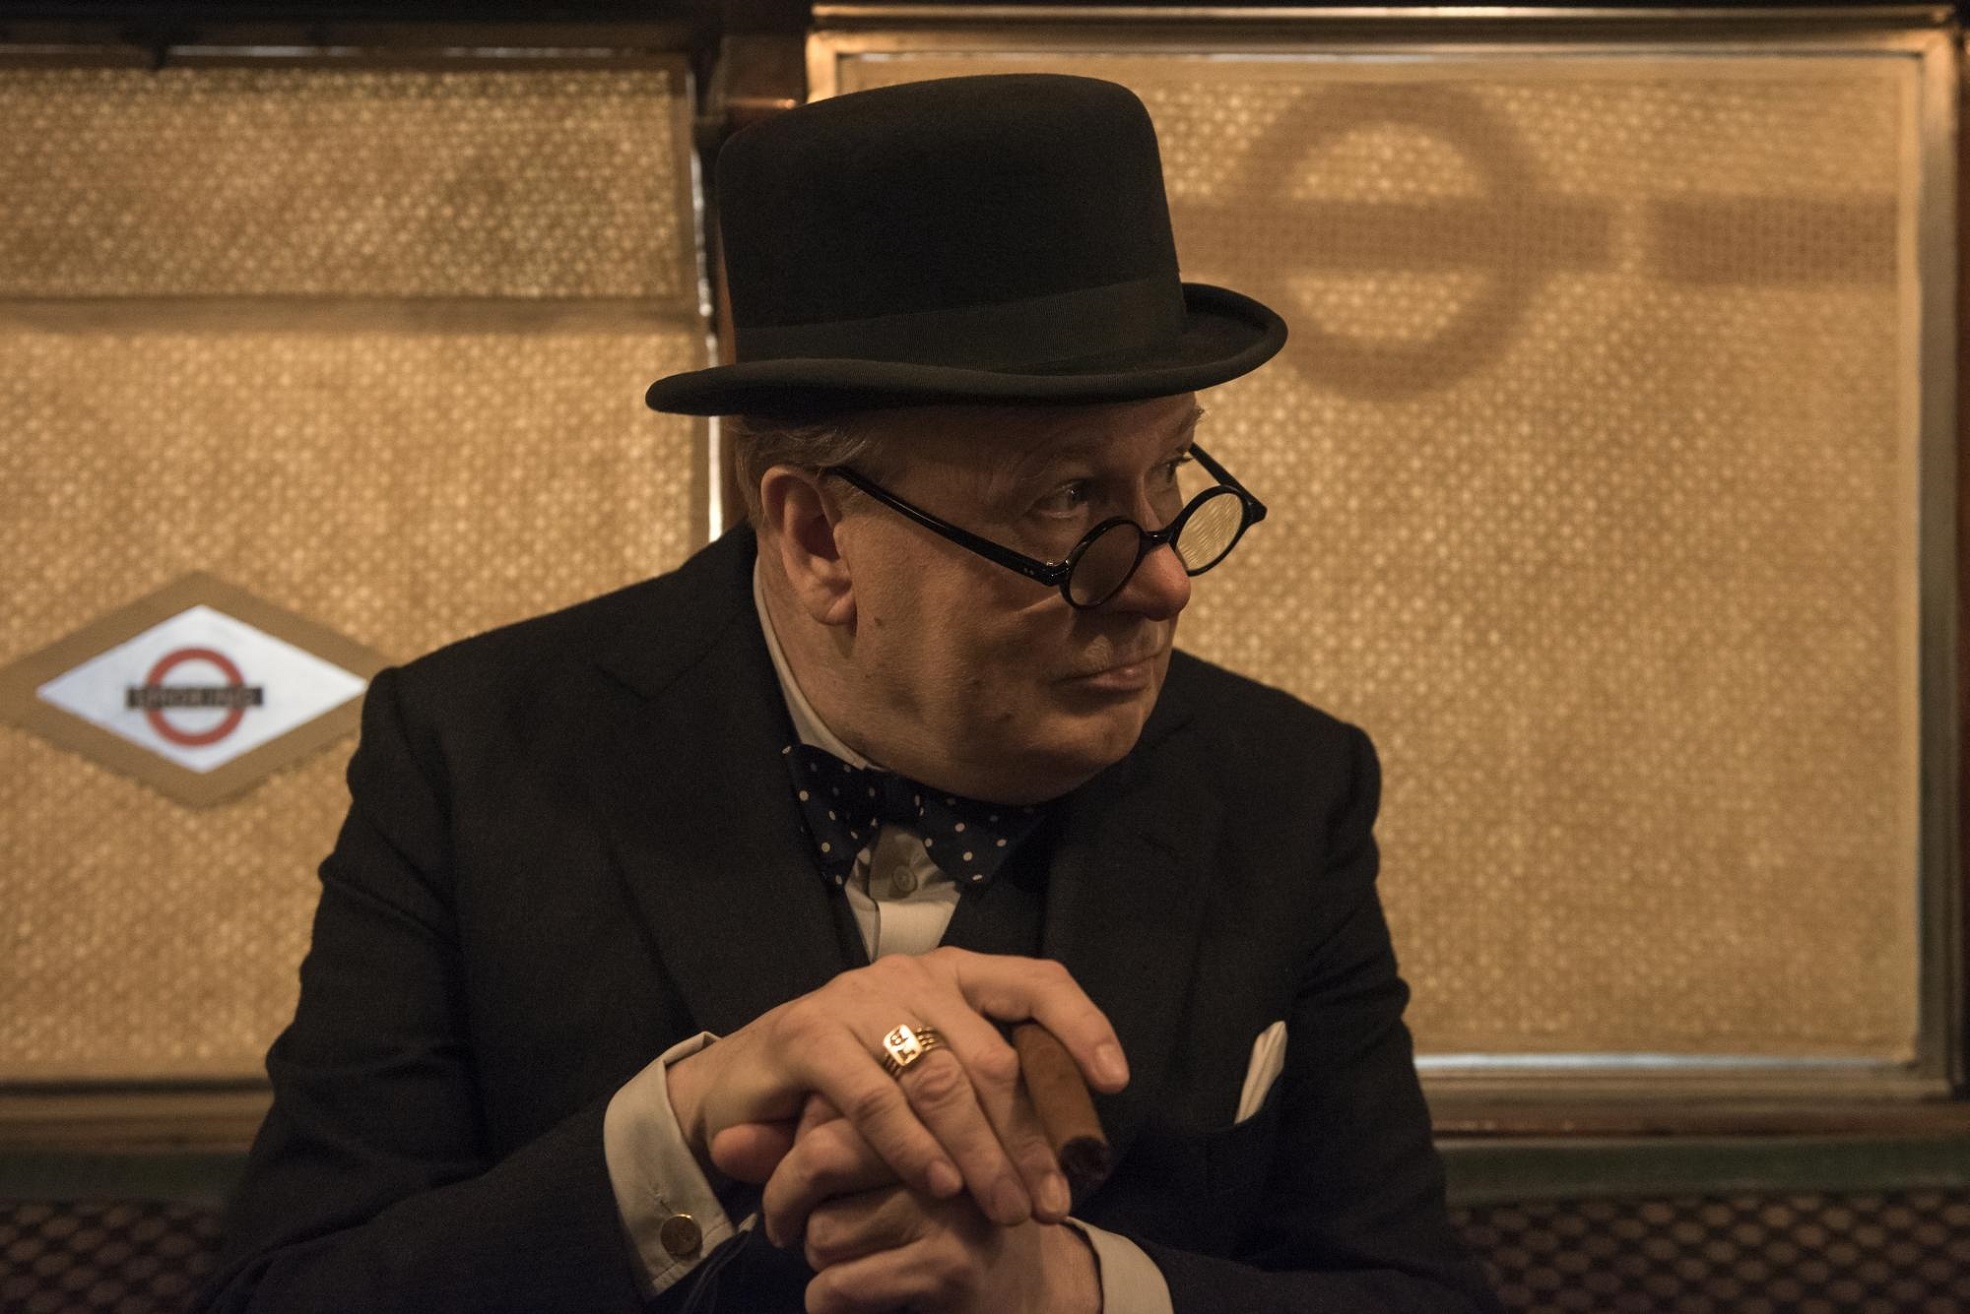 Winston Churchill in der Subway, Copyright: Universal Pictures International Germany GmbH